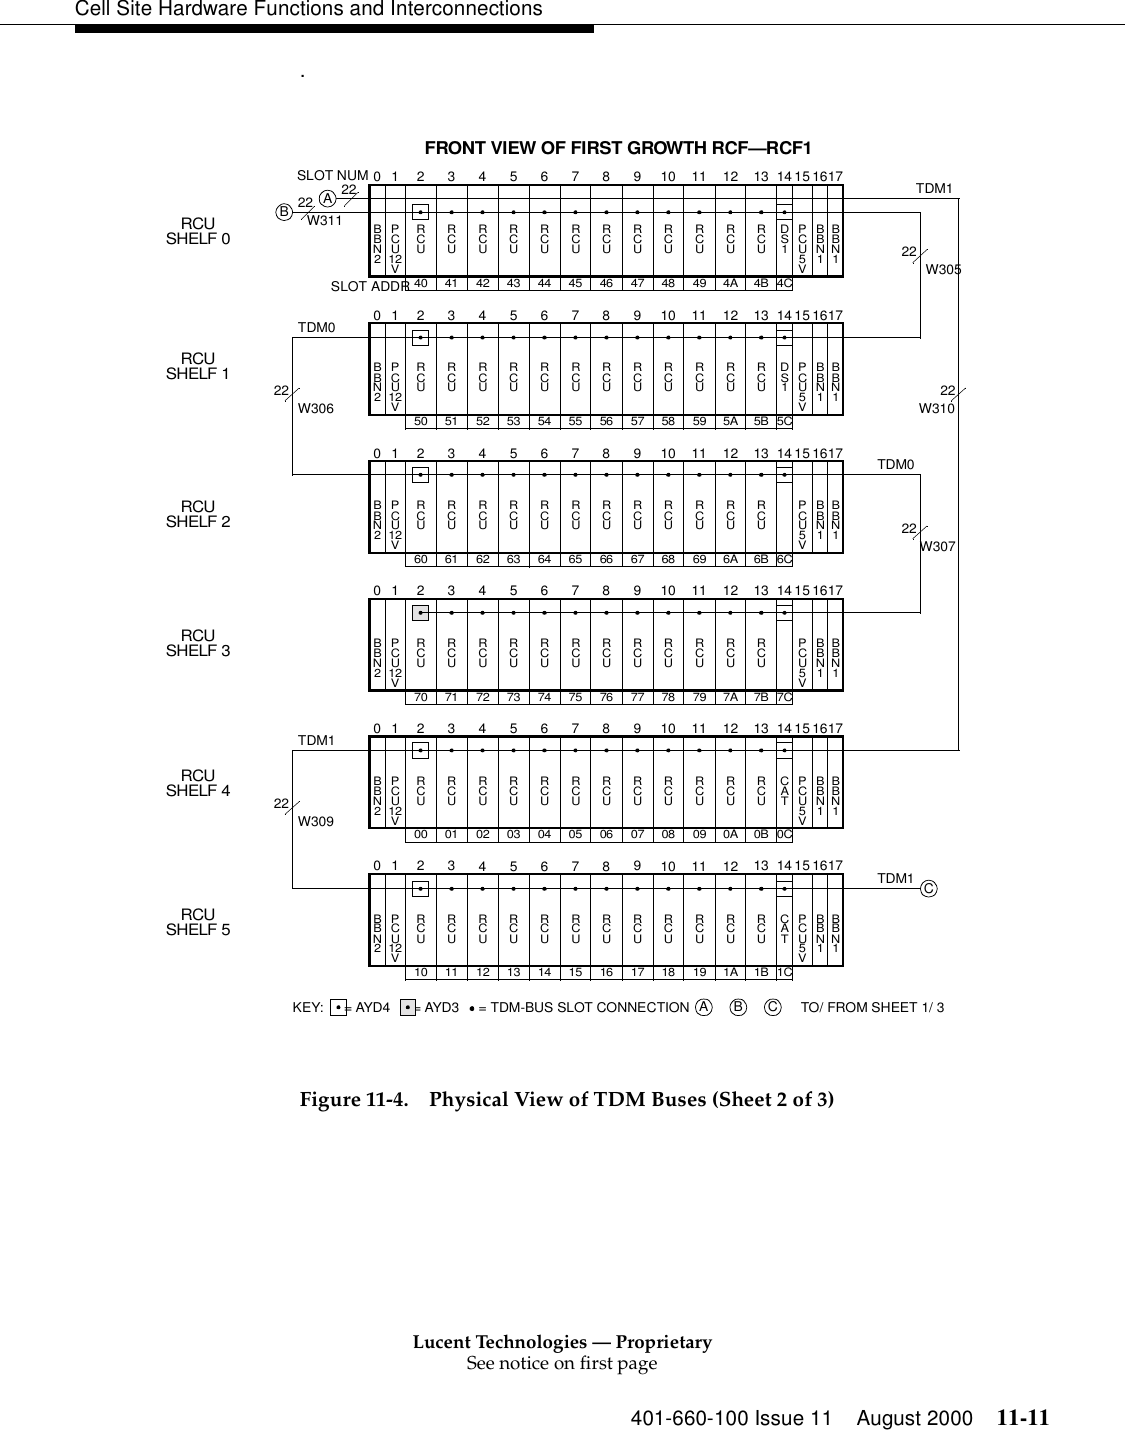 Lucent Technologies — ProprietarySee notice on first page401-660-100 Issue 11 August 2000 11-11Cell Site Hardware Functions and Interconnections.Figure 11-4. Physical View of TDM Buses (Sheet 2 of 3)TO/ FROM SHEET 1/ 30 1 3 4 5 6 7 8 9 10 11 12 13 14 1578 7972 73 74 75 76 77PCURCU12VPCU5V270 71 7A 7B 7CRCURCURCURCURCURCURCURCURCURCURCUBBN2BBN1BBN116170 1 3 4 5 6 7 8 9 10 11 12 13 14 1558 5952 53 54 55 56 57PCURCU12VPCU5VDS1250 51 5A 5B 5CRCURCURCURCURCURCURCURCURCURCURCUBBN2BBN1BBN116170 1 3 4 5 6 7 8 9 10 11 12 13 14 1568 6962 63 64 65 66 67PCURCU12VPCU5V260 61 6A 6B 6CRCURCURCURCURCURCURCURCURCURCURCUBBN2BBN1BBN116170 1 3 4 5 6 7 8 9 10 11 12 13 14 1548 4942 43 44 45 46 47PCURCU12VPCU5VDS1240 41 4A 4B 4CRCURCURCURCURCURCURCURCURCURCURCUBBN2BBN1BBN116170 1 3 4 5 6 7 8 9 10 11 12 13 14 1508 0902 03 04 05 06 07PCURCU12VPCU5VCAT200 01 0A 0B 0CRCURCURCURCURCURCURCURCURCURCURCUBBN2BBN1BBN1161701 3 45678910 11 12 13 14 1518 1912 13 14 15 16 17PCURCU12VPCU5VCAT210 11 1A 1B 1CRCURCURCURCURCURCURCURCURCURCURCUBBN2BBN1BBN11617KEY:  = AYD4 = AYD3FRONT VIEW OF FIRST GROWTH RCF—RCF1RCUSHELF 0RCUSHELF 1RCUSHELF 2RCUSHELF 3RCUSHELF 4RCUSHELF 5SLOT NUM22W30722W30622W305TDM122W309SLOT ADDRTDM0TDM0TDM122W310ABB CACTDM122 22= TDM-BUS SLOT CONNECTIONW311